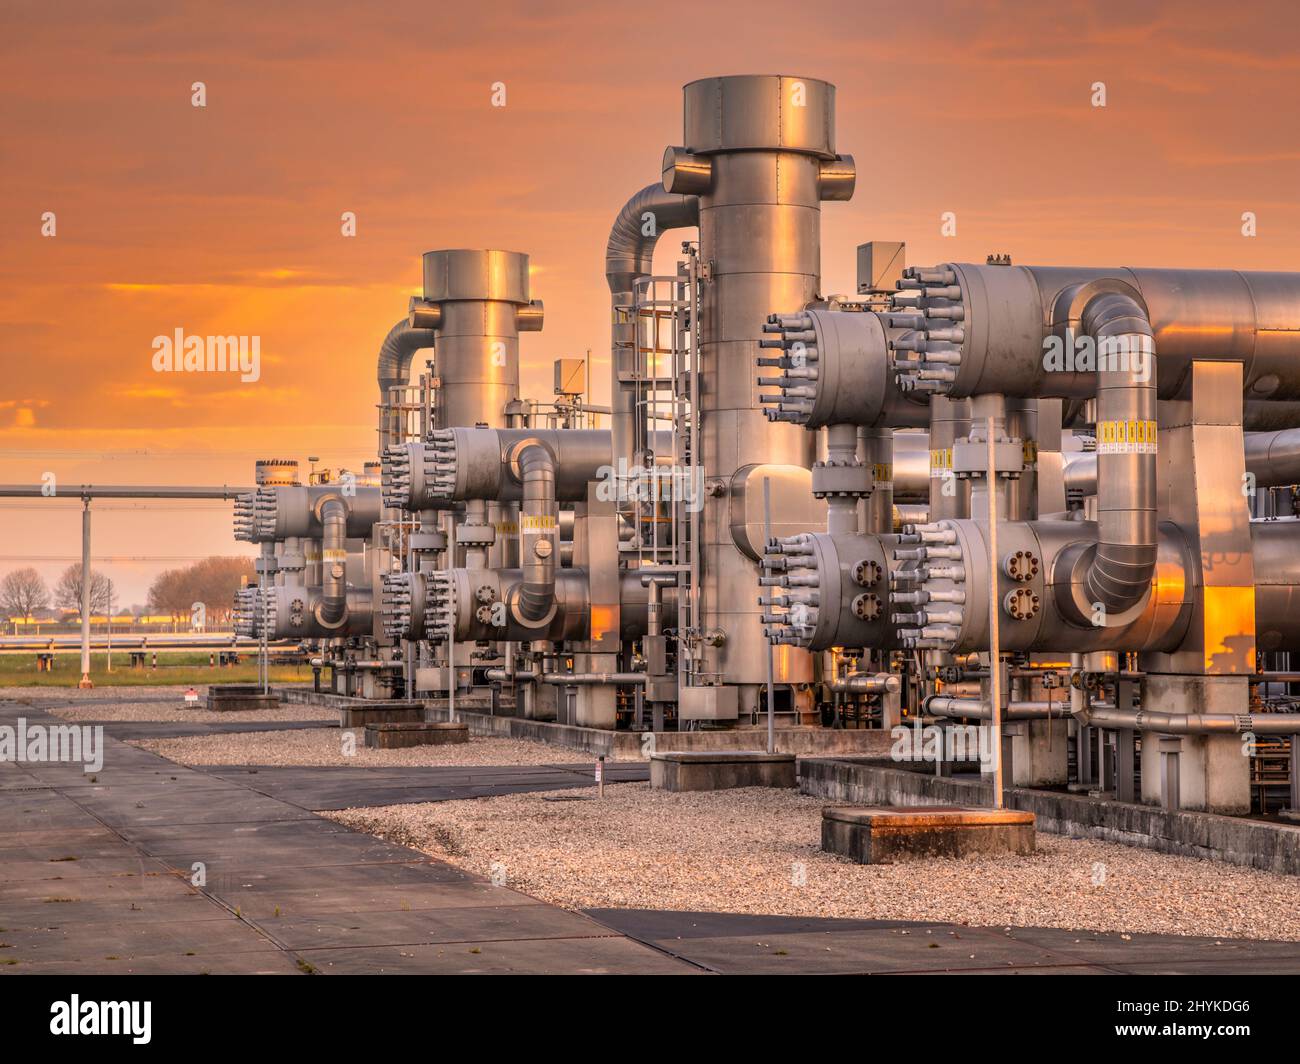 Oil and gas processing plant in the Groningen Gas Field area with pipe line valves. This is one of the few natural gas fields in Europe. Stock Photo